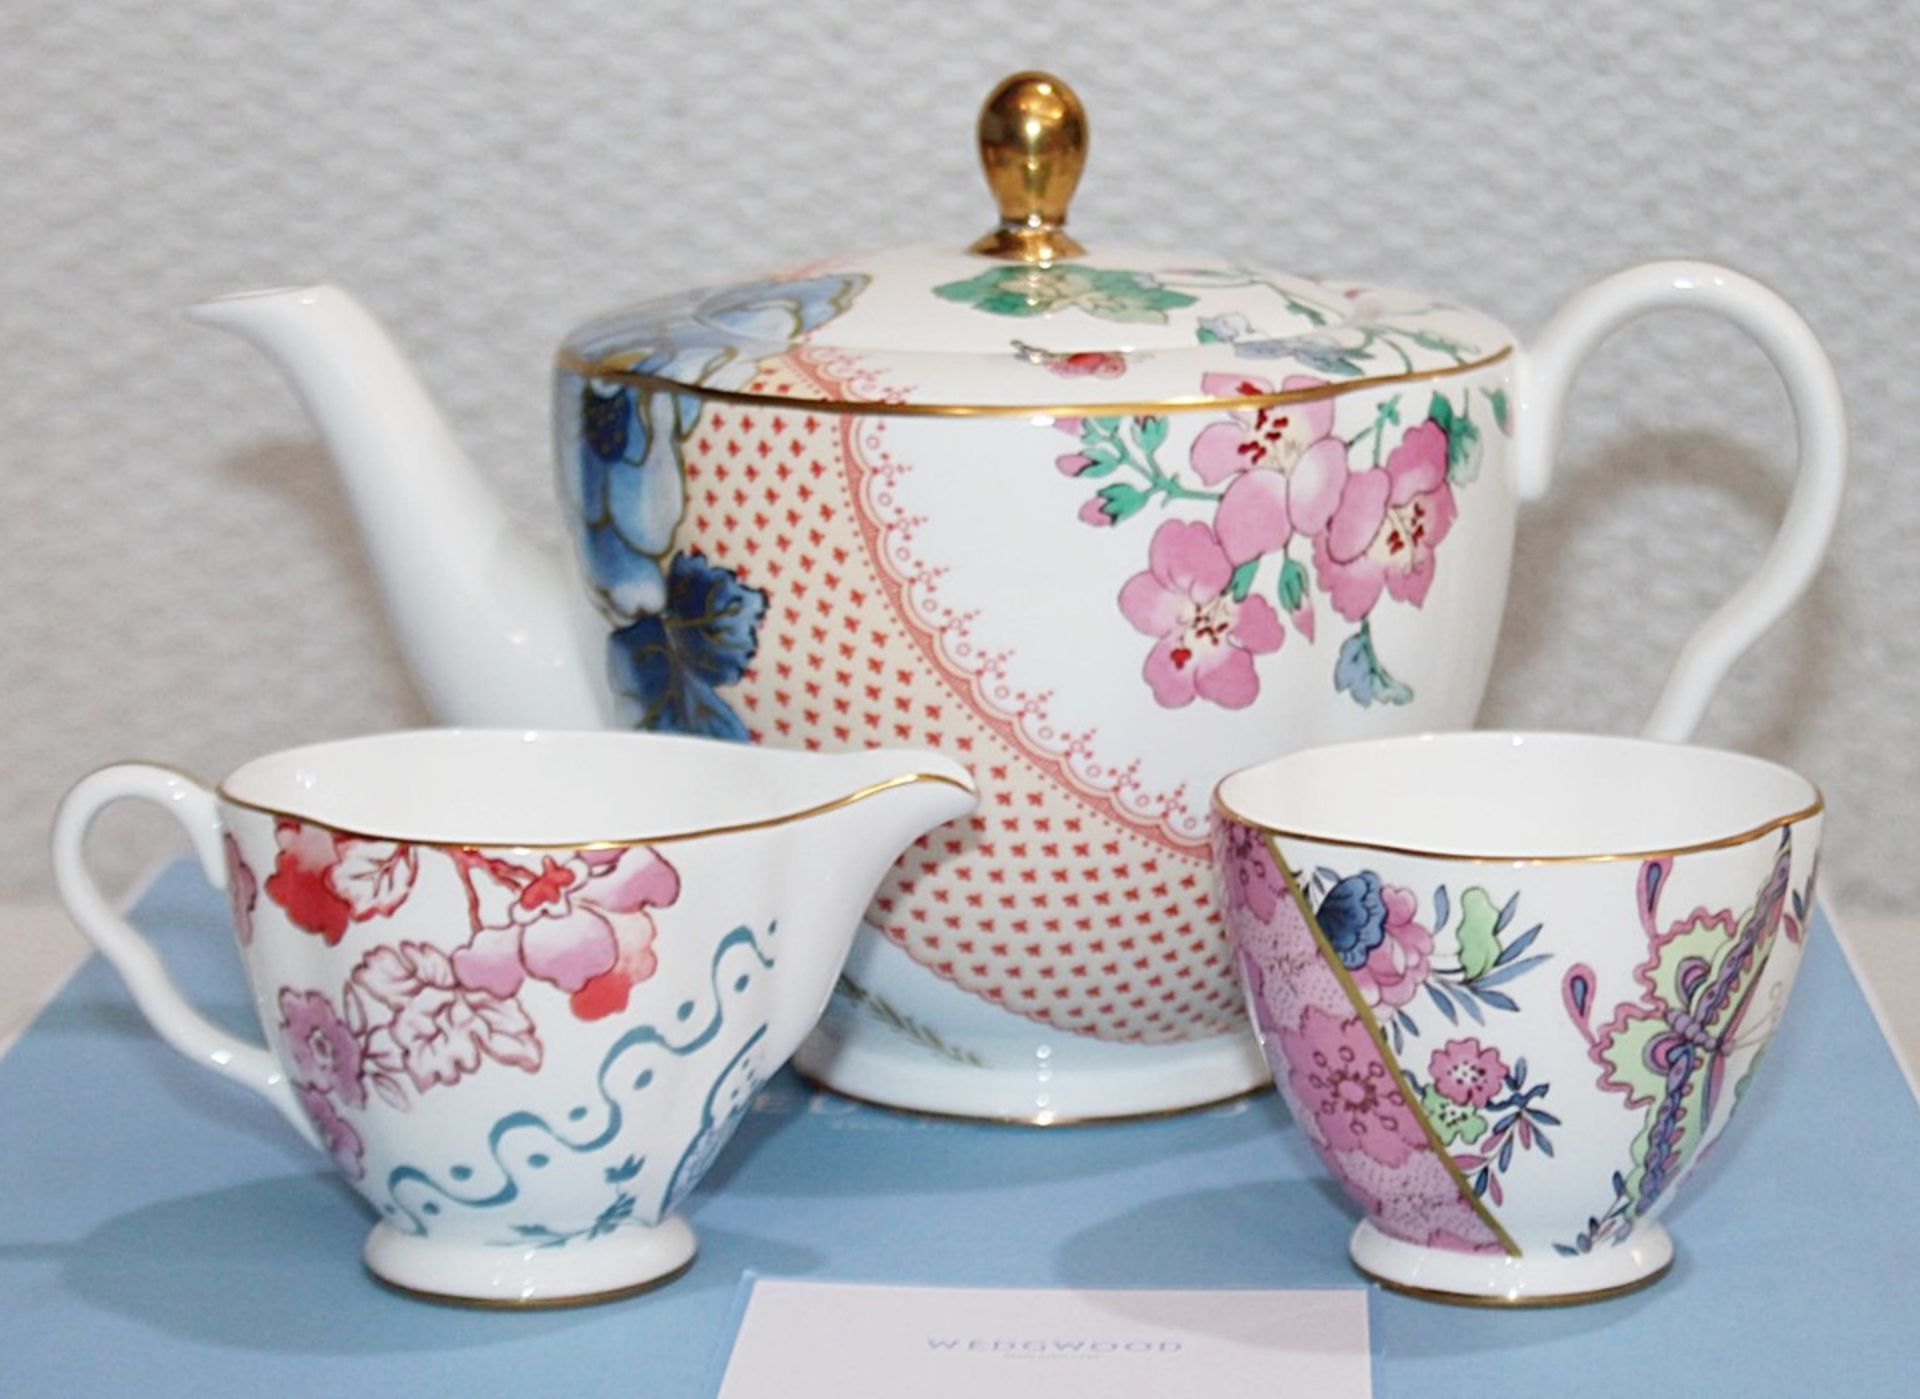 1 x WEDGWOOD 'Butterfly Bloom' Fine Bone China Teapot, Creamer And Sugar Bowl Set - RRP £195.00 - Image 3 of 8